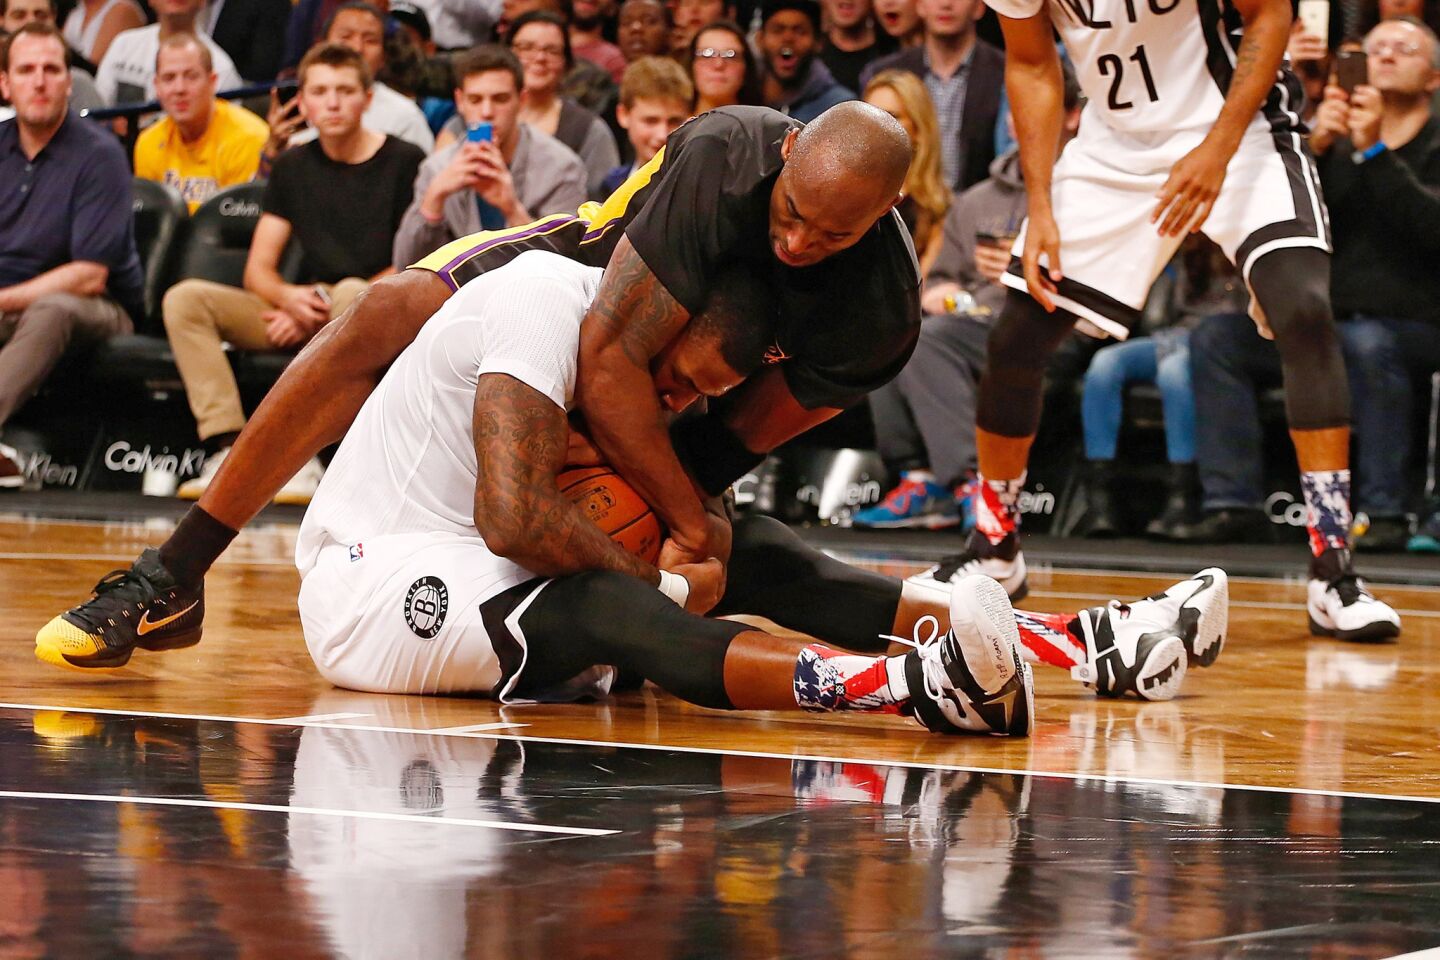 Los Angeles Lakers' Kobe Bryant and Brooklyn Nets' Thomas Robinson fight for the ball on Friday.